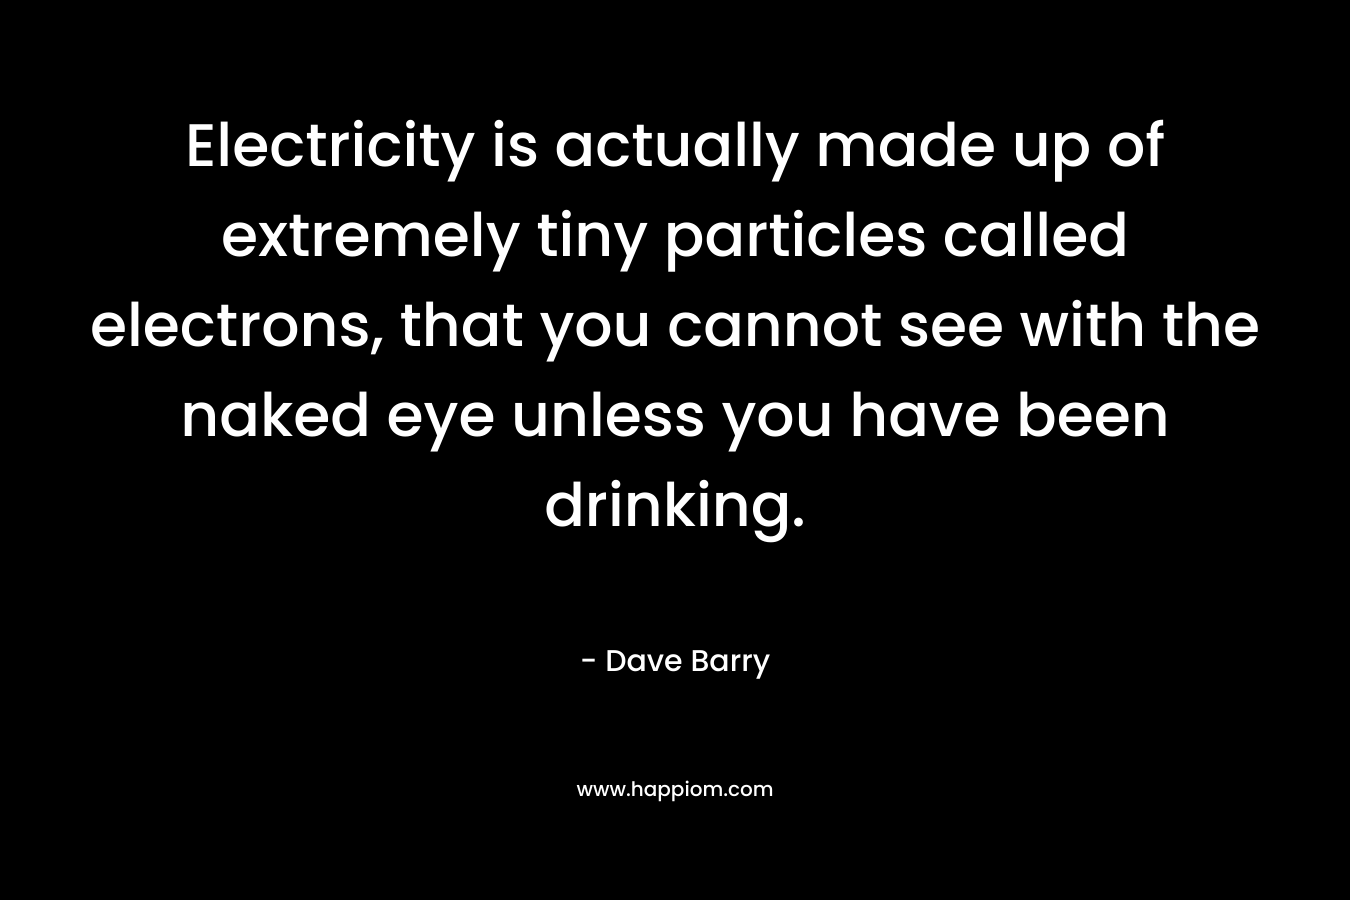 Electricity is actually made up of extremely tiny particles called electrons, that you cannot see with the naked eye unless you have been drinking.